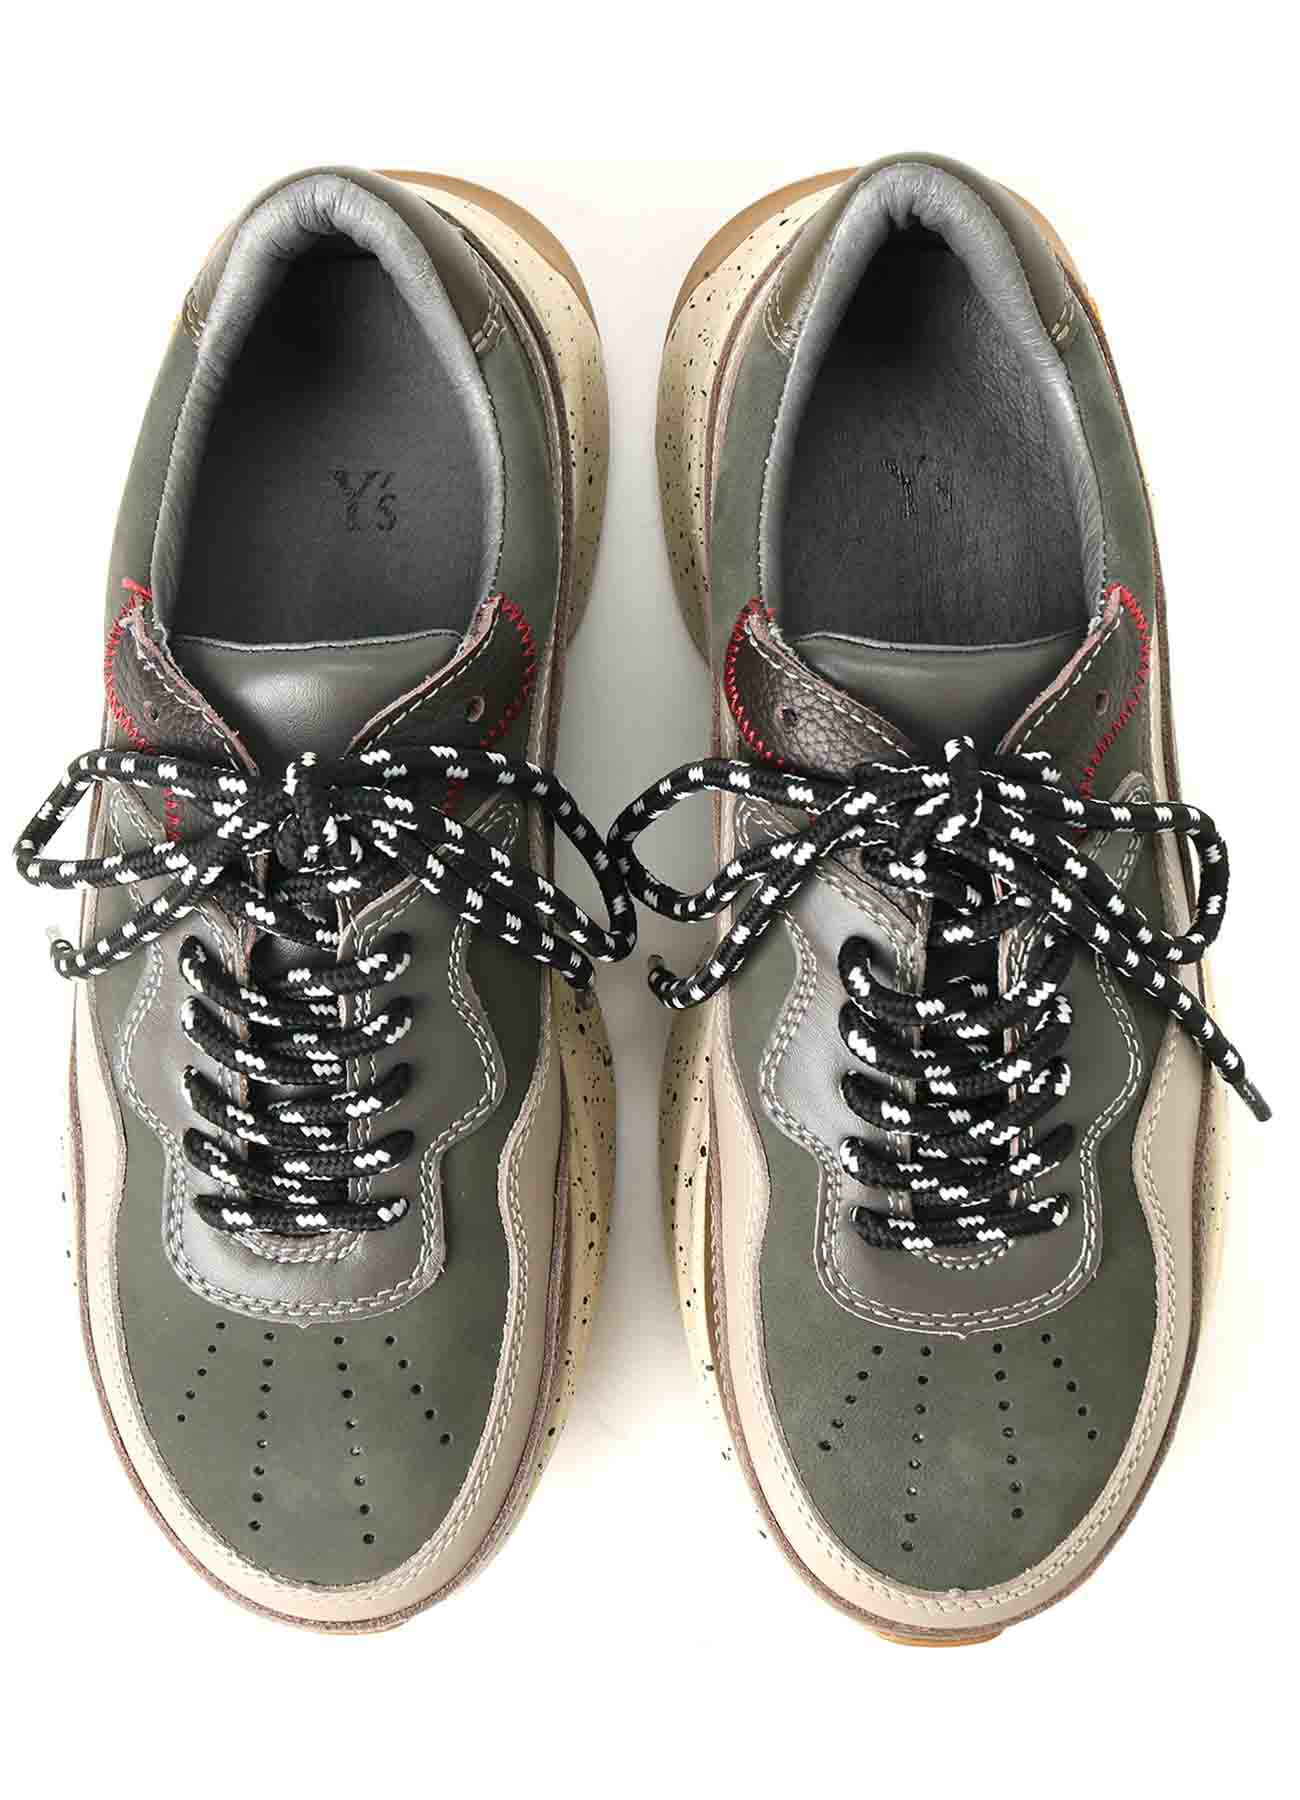 LEATHER DAD SNEAKERS